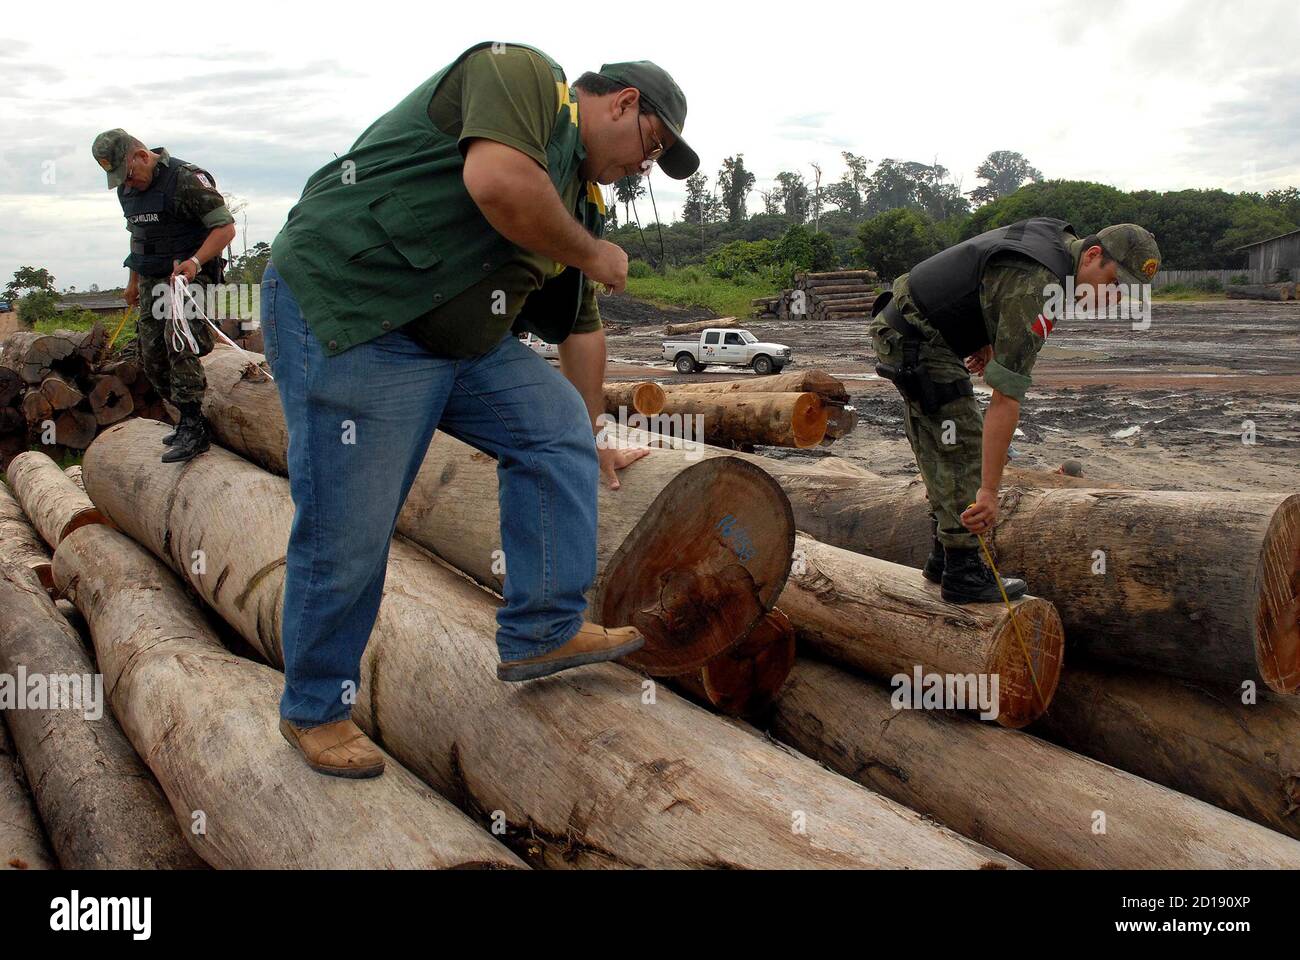 Para state policemen and government environmental inspectors patrol fields  of former virgin Amazon rain forest destroyed by loggers, in Tailandia, 180  km (112 miles) south of Belem at the mouth of the